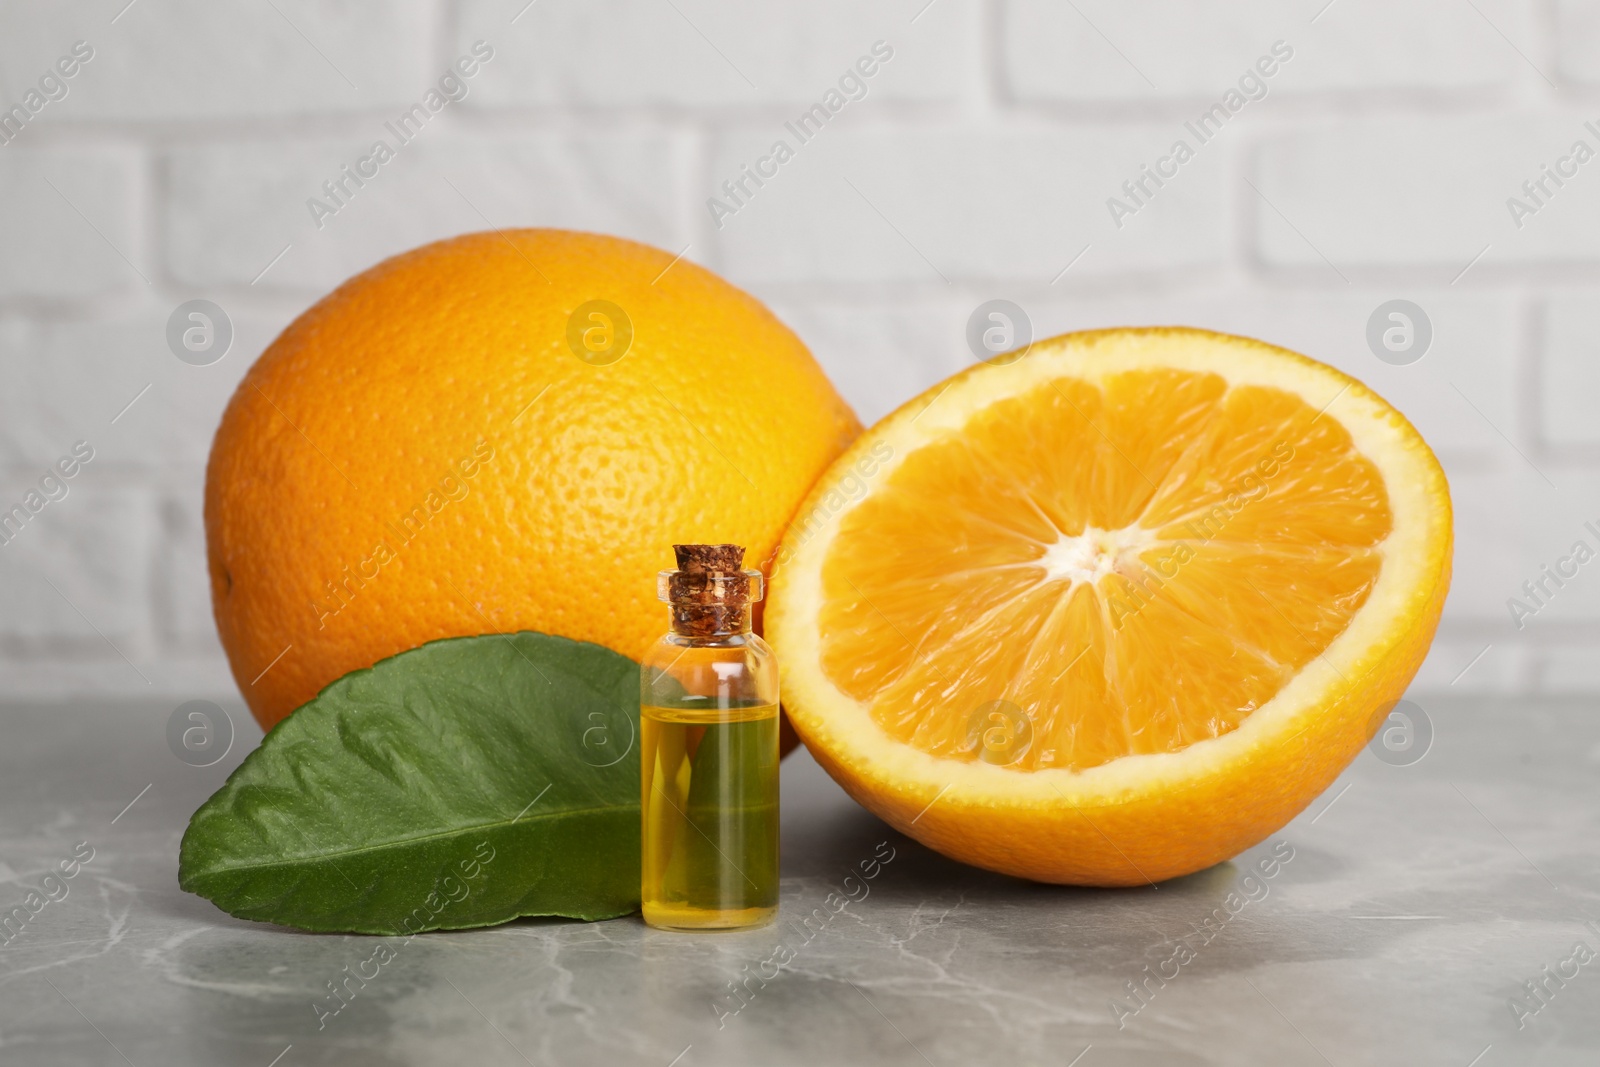 Photo of Bottle of essential oil with oranges and leaf on grey marble table against white brick wall